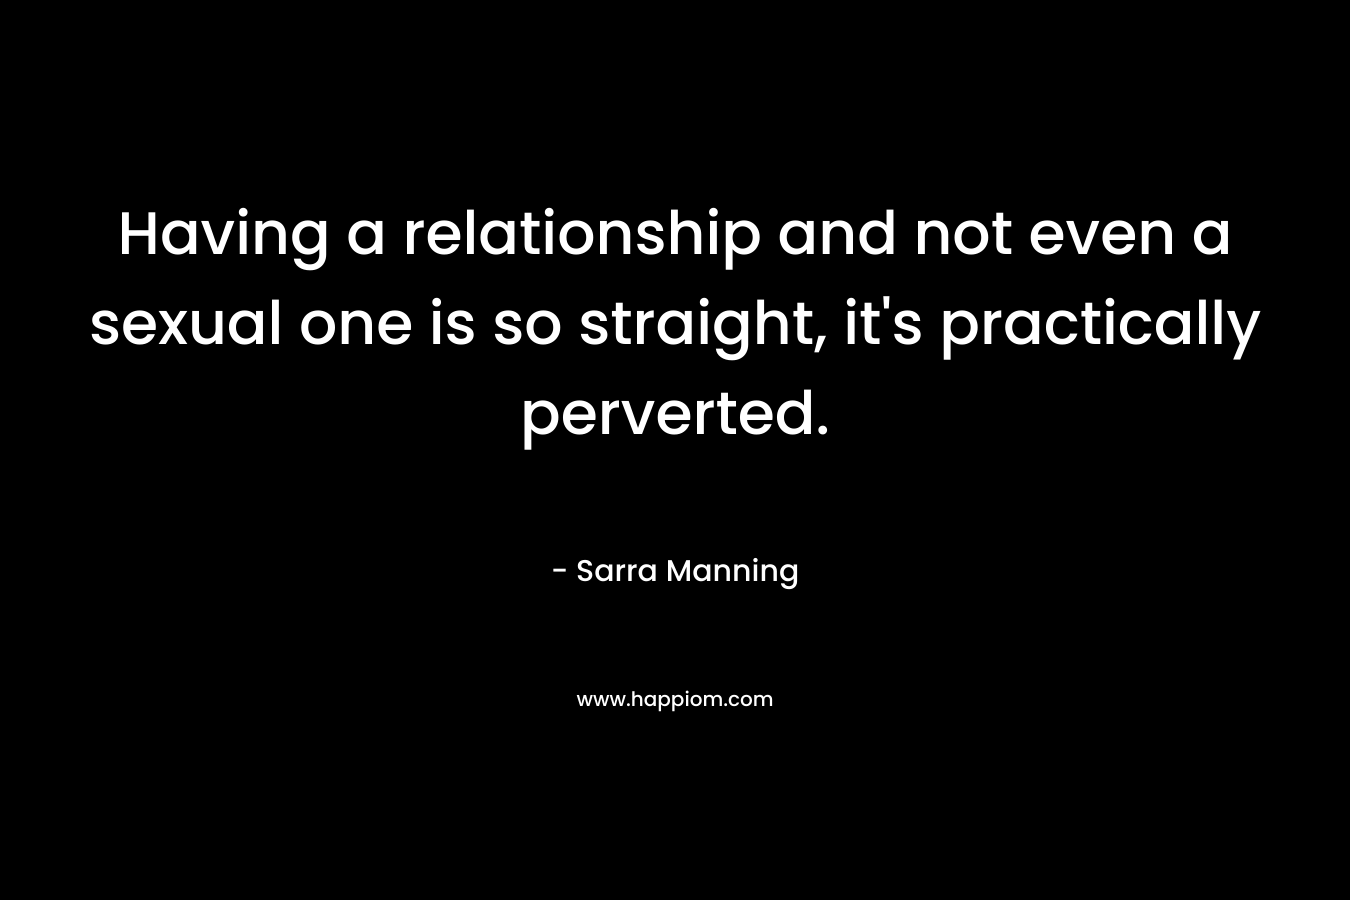 Having a relationship and not even a sexual one is so straight, it's practically perverted.